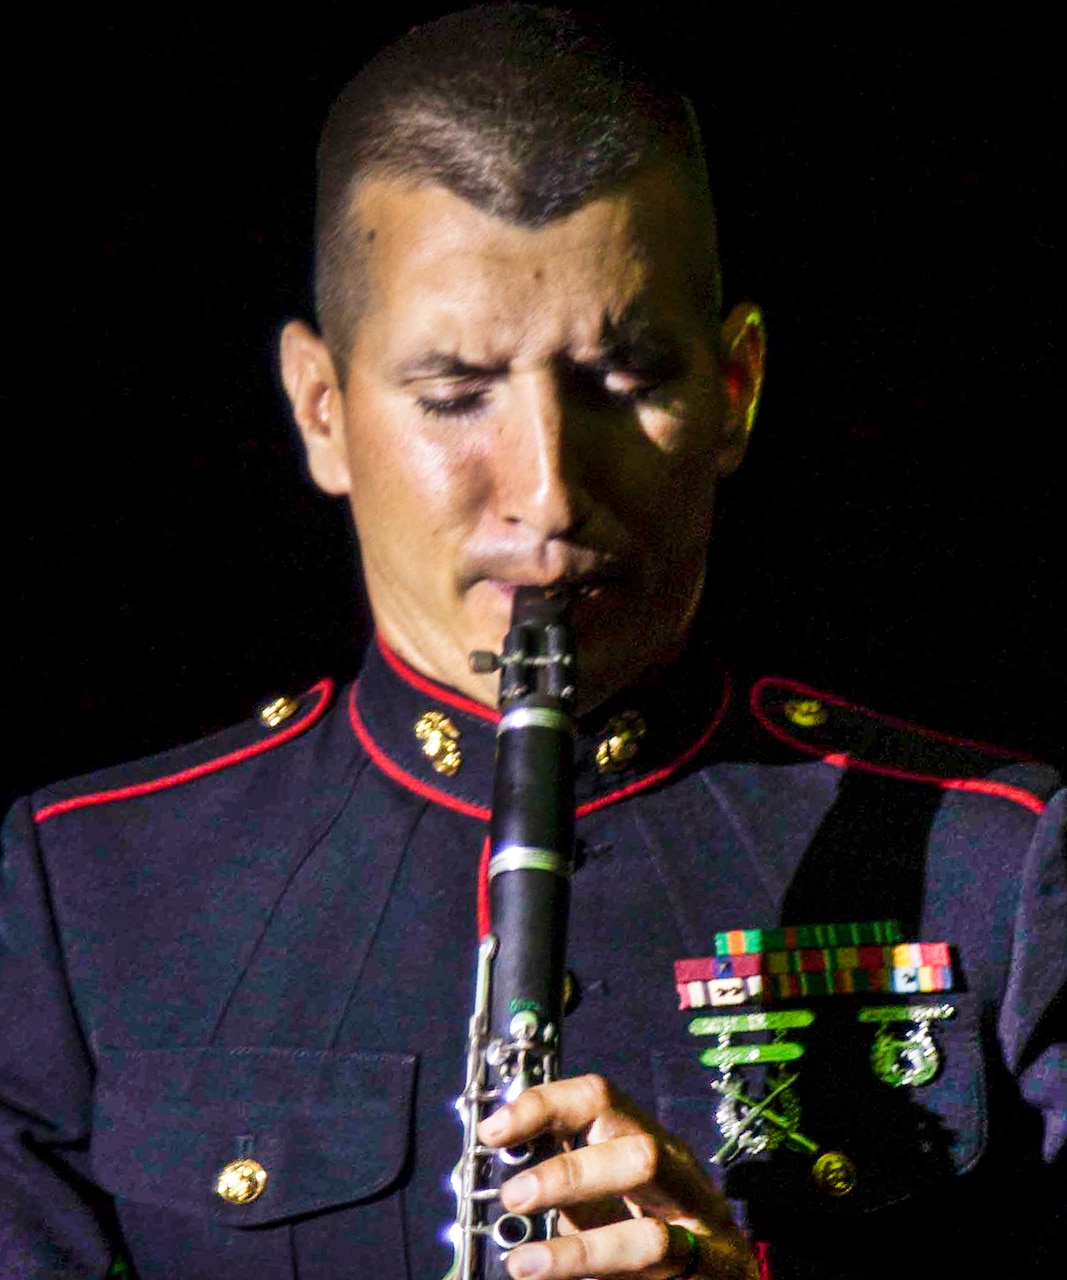 Clarinetist Sgt. Justin Grunes, a musician with Marine Corps Band San Diego aboard Marine Corps Recruit Depot San Diego, Calif., has spent time in the Marine Corps and the Army Reserves, and earned his degree in music performance from the University of Delaware.  He couldn’t resist the call, and was drawn back to the Marine Corps to live out his dream as one of the few and proud, and a professional musician.  Grunes has been performing with the Marine Corps bands for a total of 9 years.